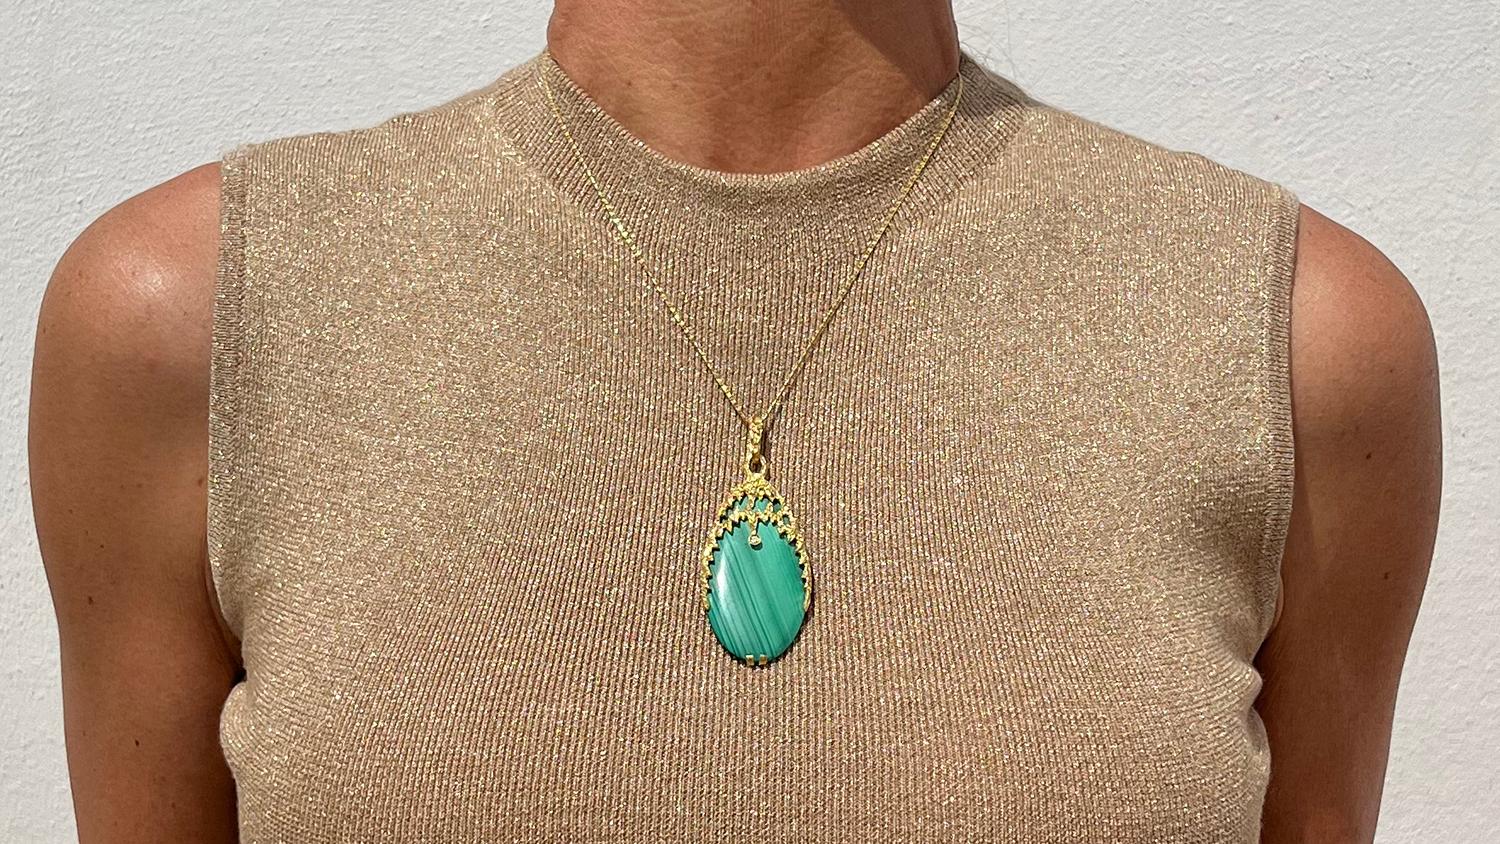 This 18 karat gold, malachite and dimond has a wonderful oval shape. The pendant radiates style and elegance and will be a perfect fit for any occasion.

The pendant has a classic bail which allows a chain to pass through. Please note that the chain